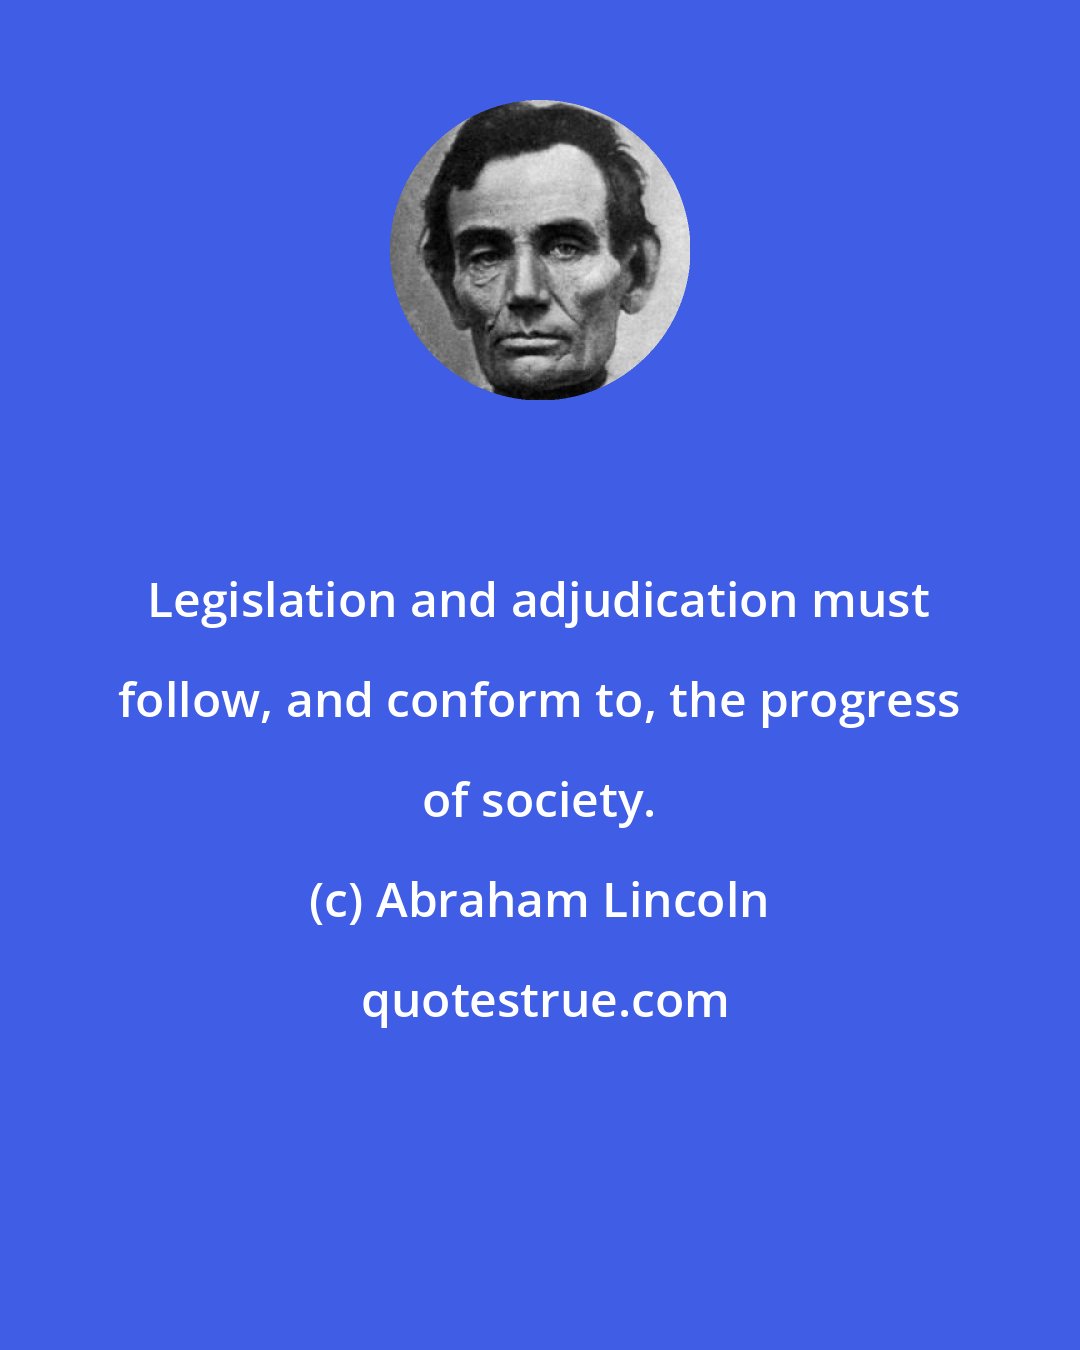 Abraham Lincoln: Legislation and adjudication must follow, and conform to, the progress of society.